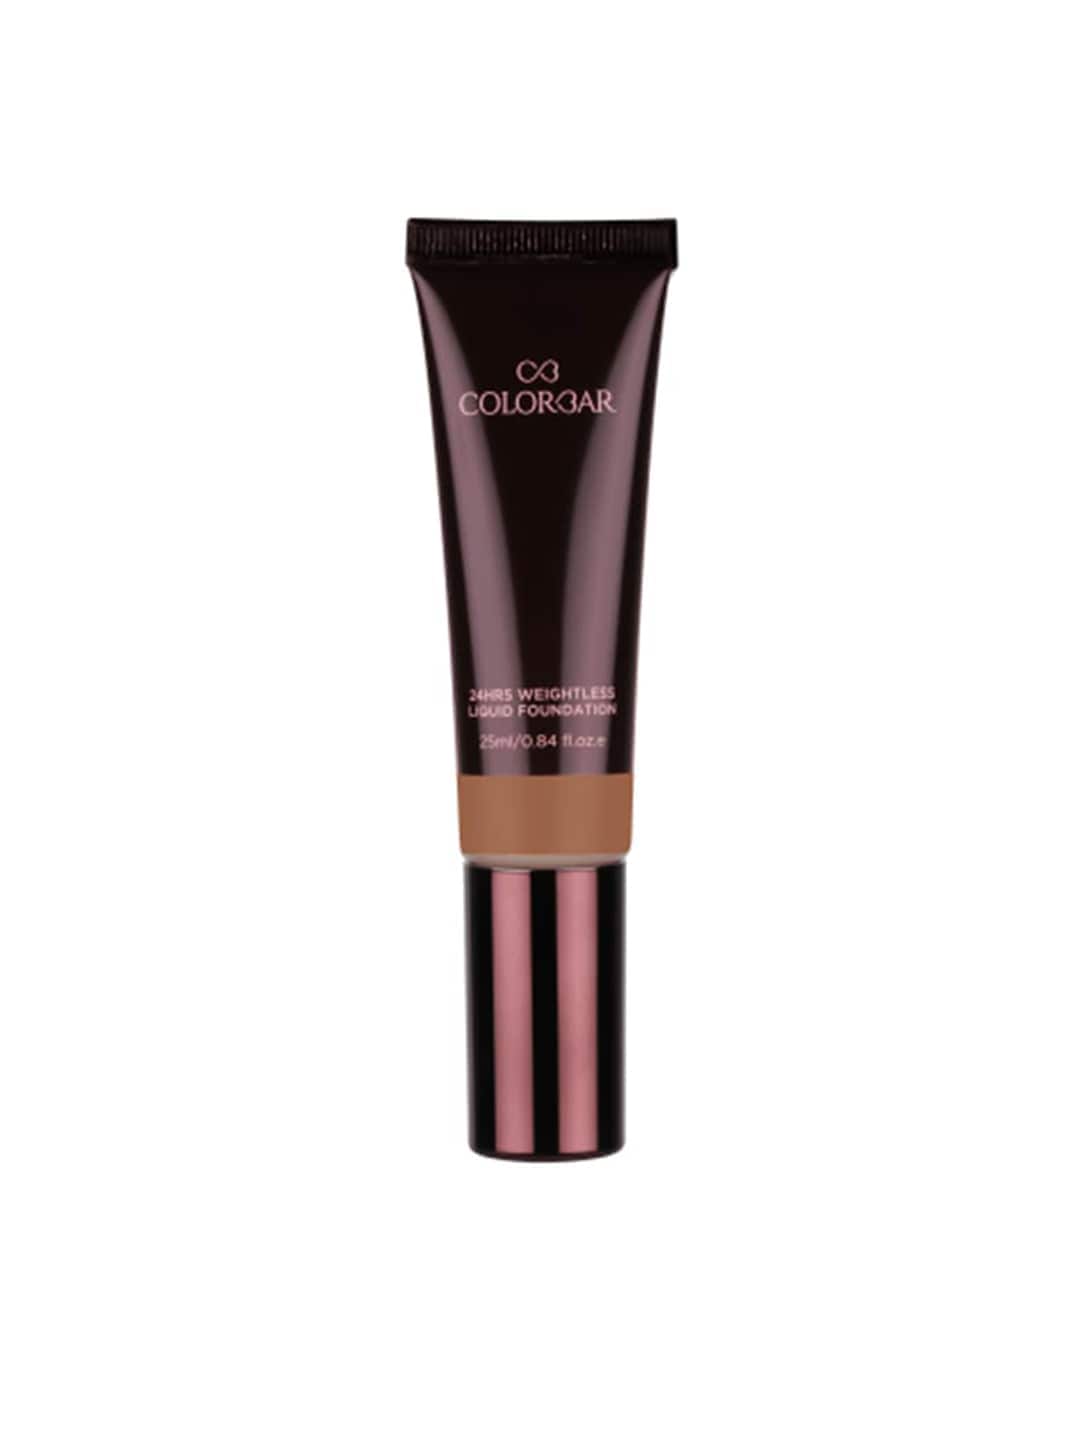 Colorbar 24Hrs Weightless Liquid Foundation - FW 6.4 25ml Price in India